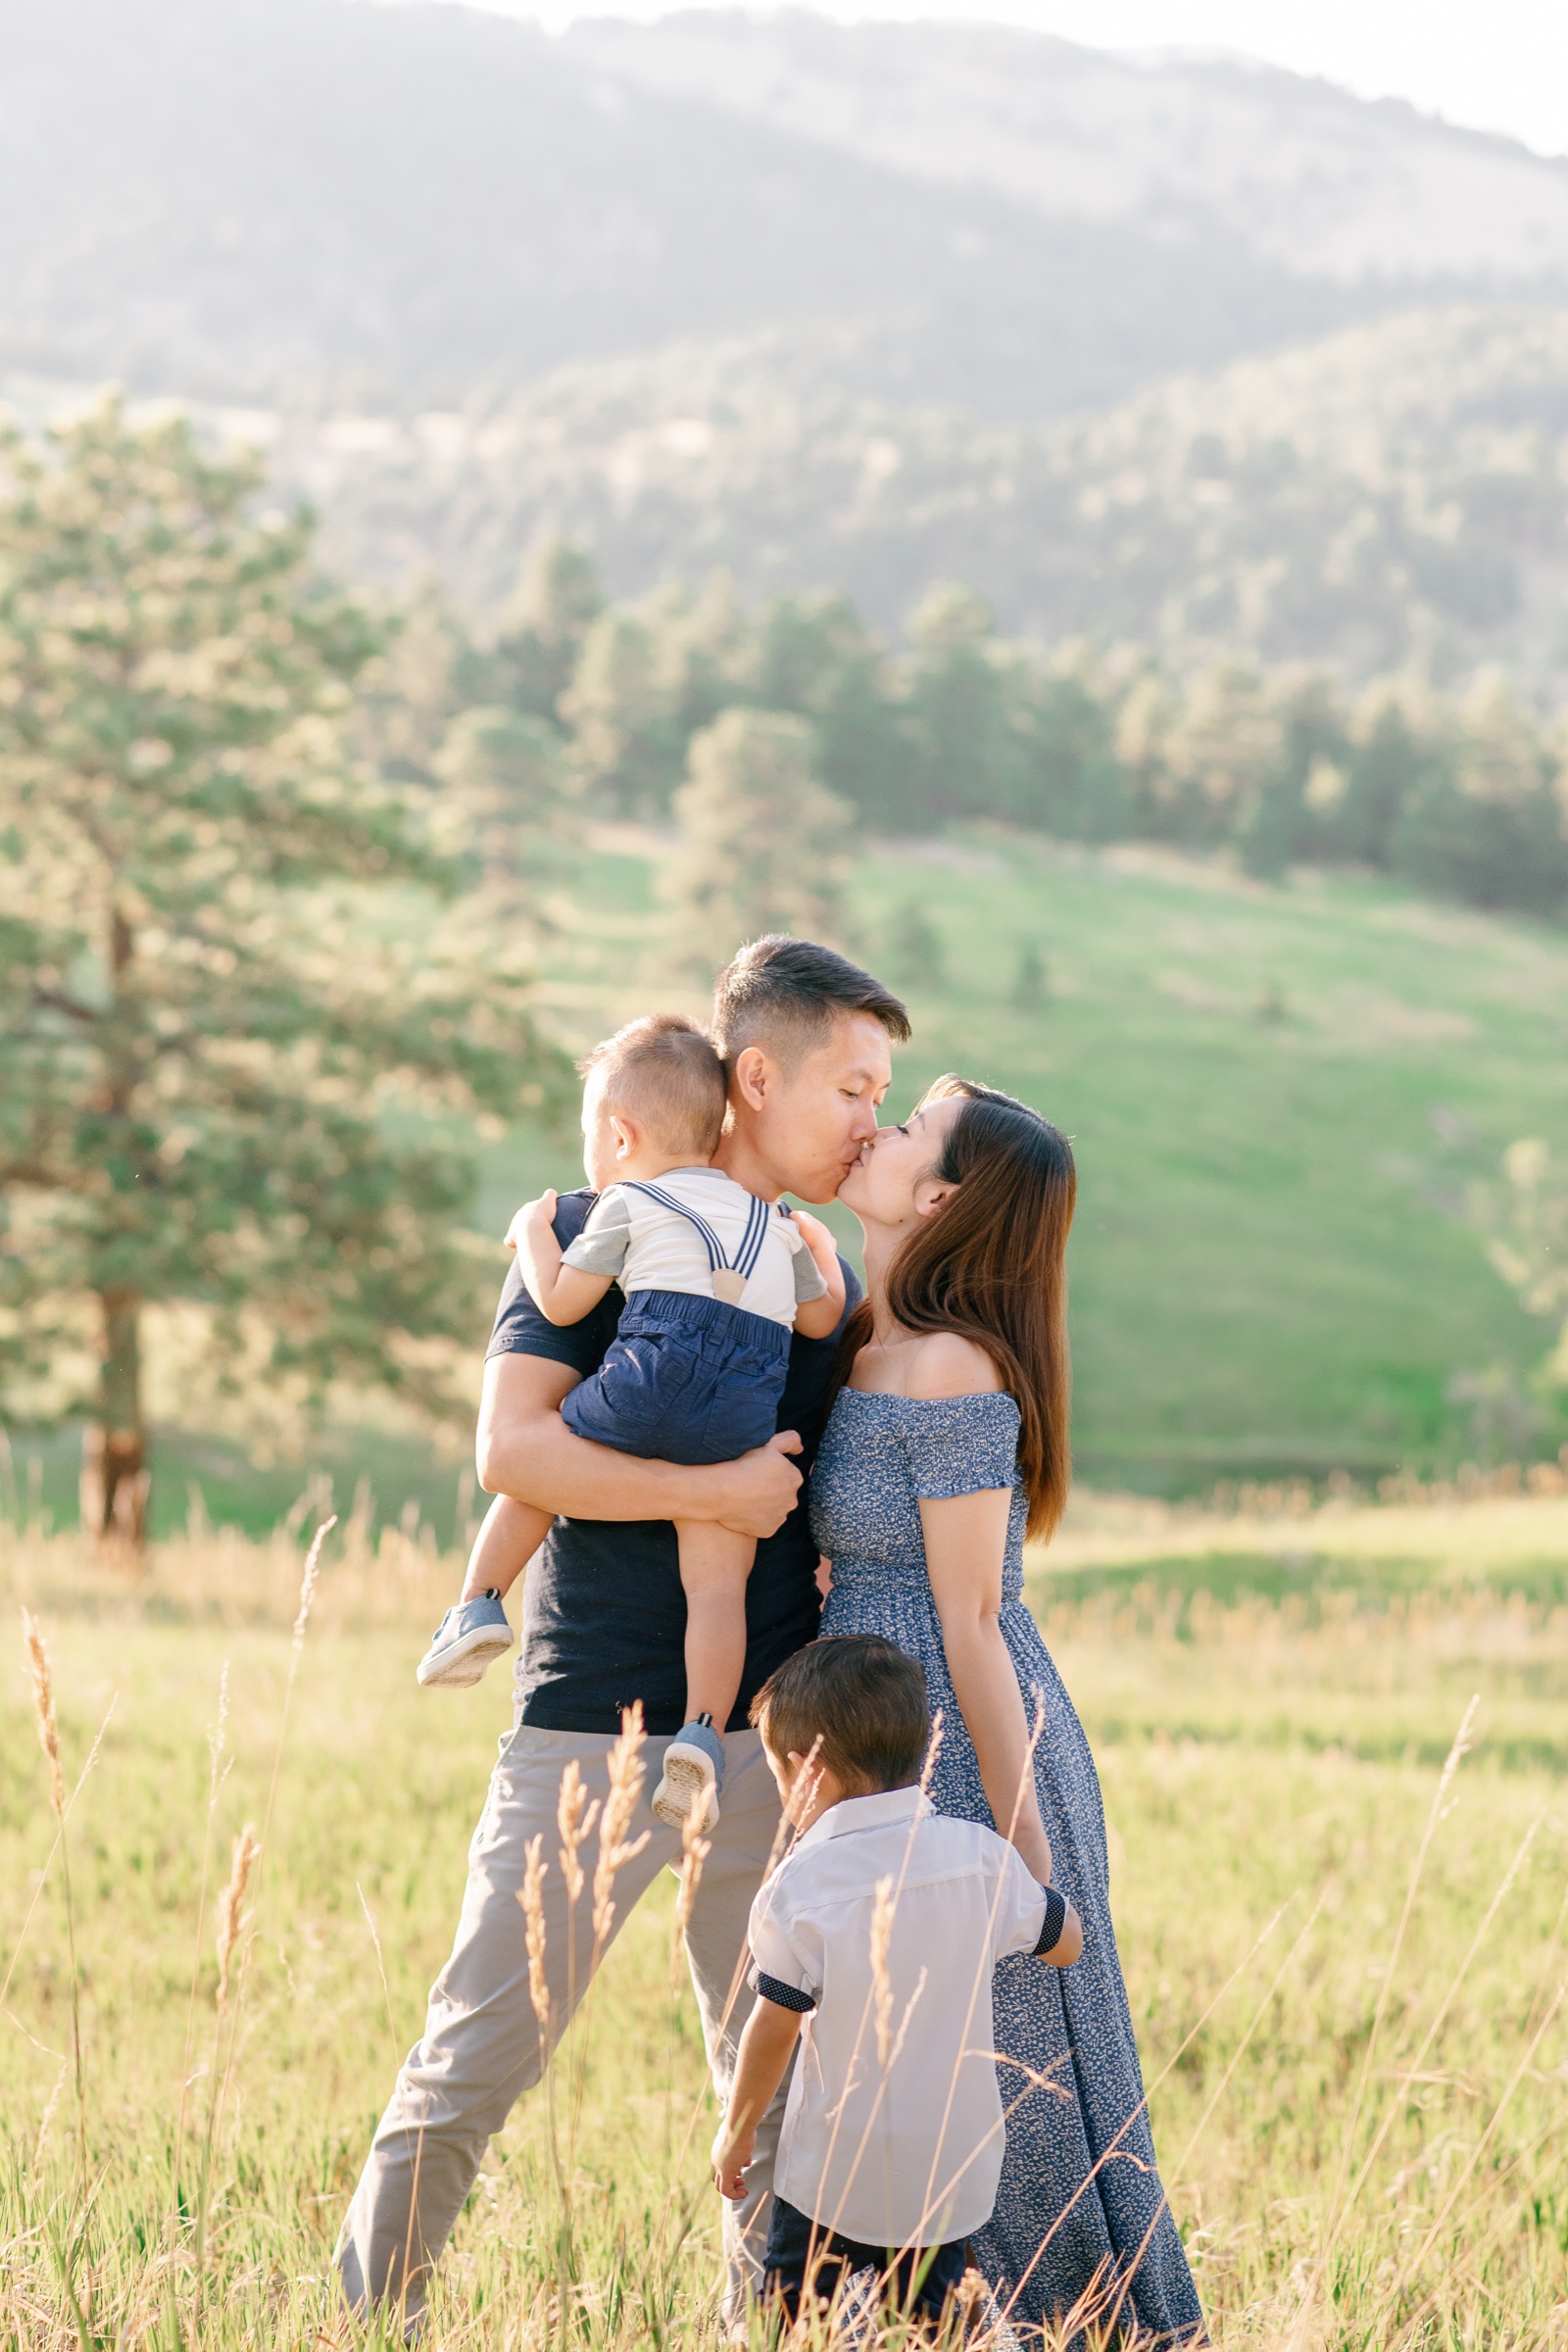 Golden hour family portrait session taken by Olive and Aster based in Colorado with mountains in the background